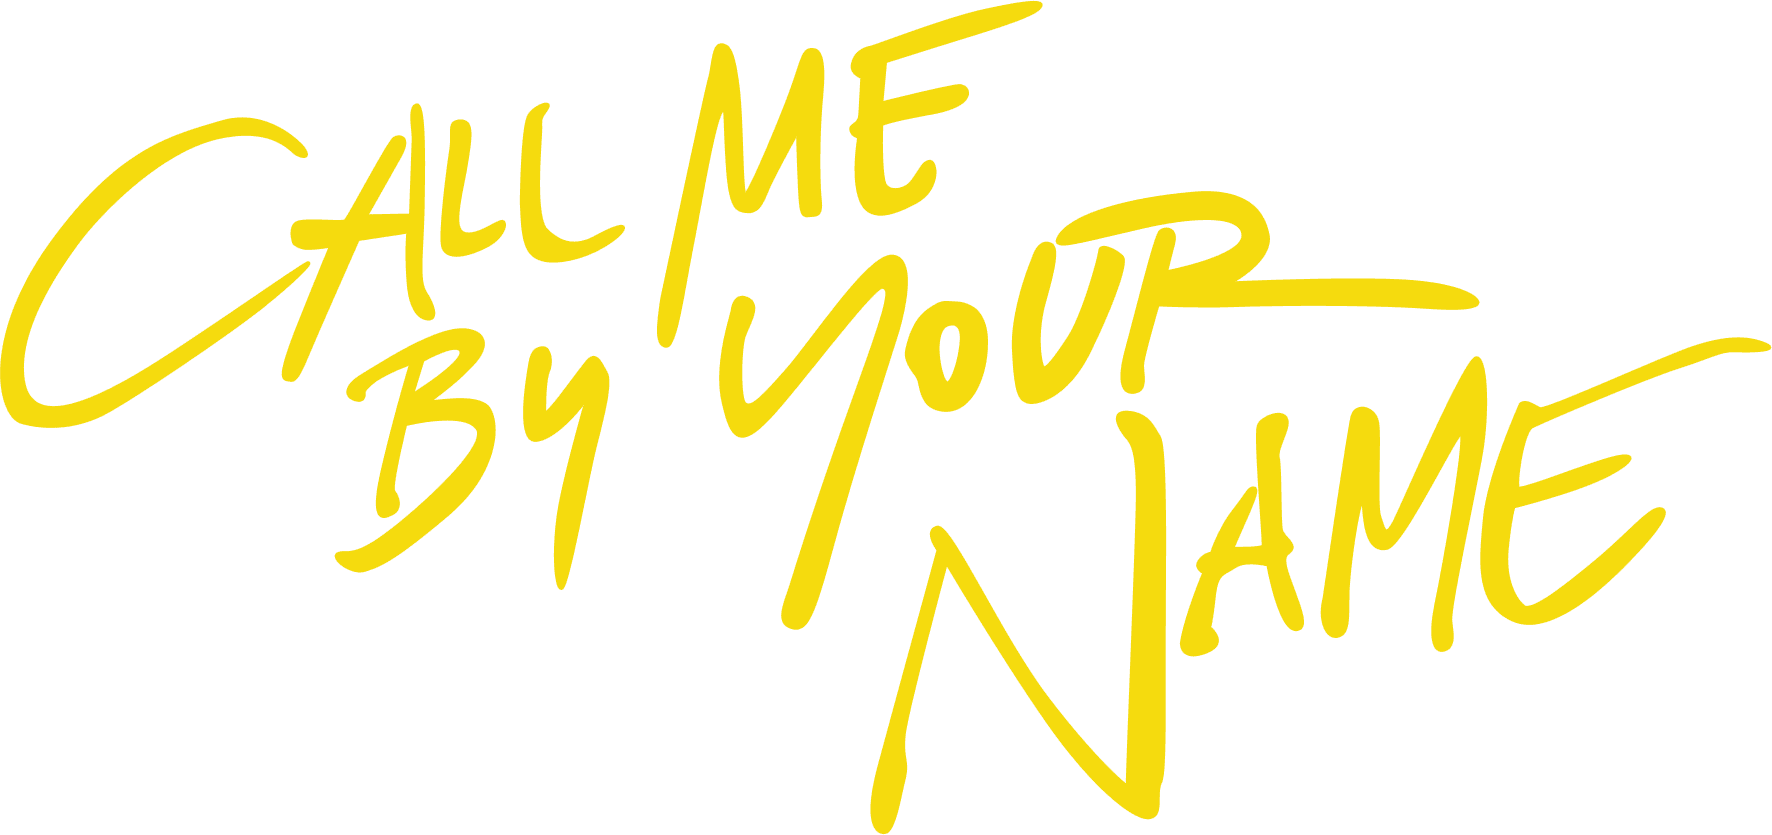 Call Me by Your Name logo